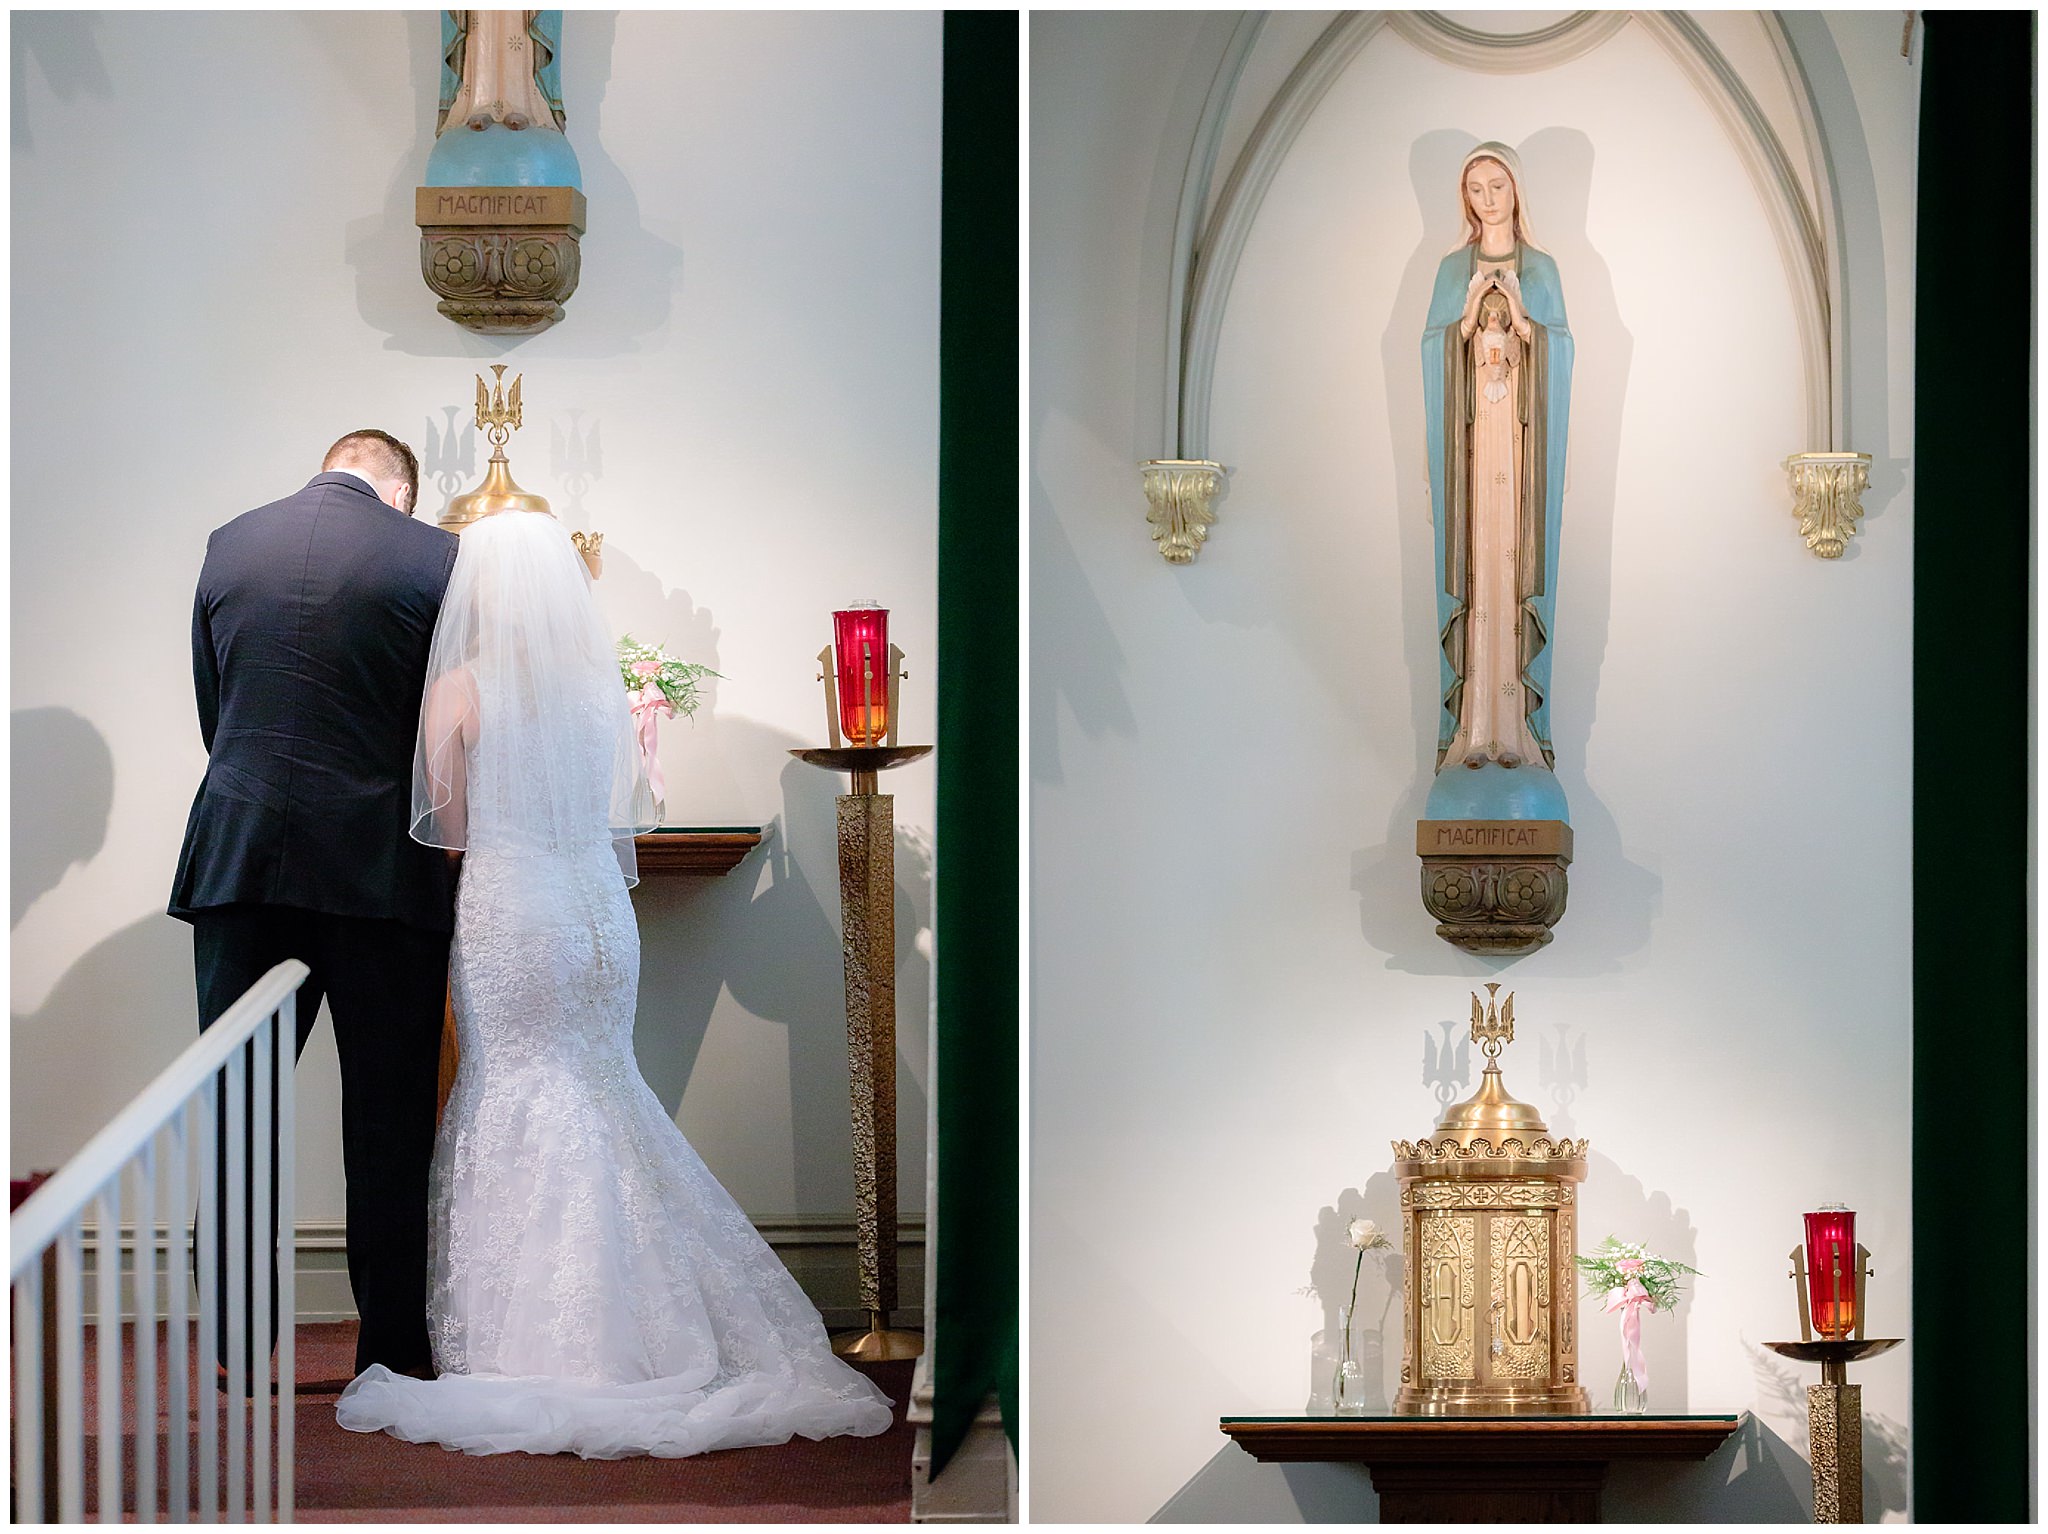 Bride & groom take roses to Mary during their Duquesne University wedding ceremony